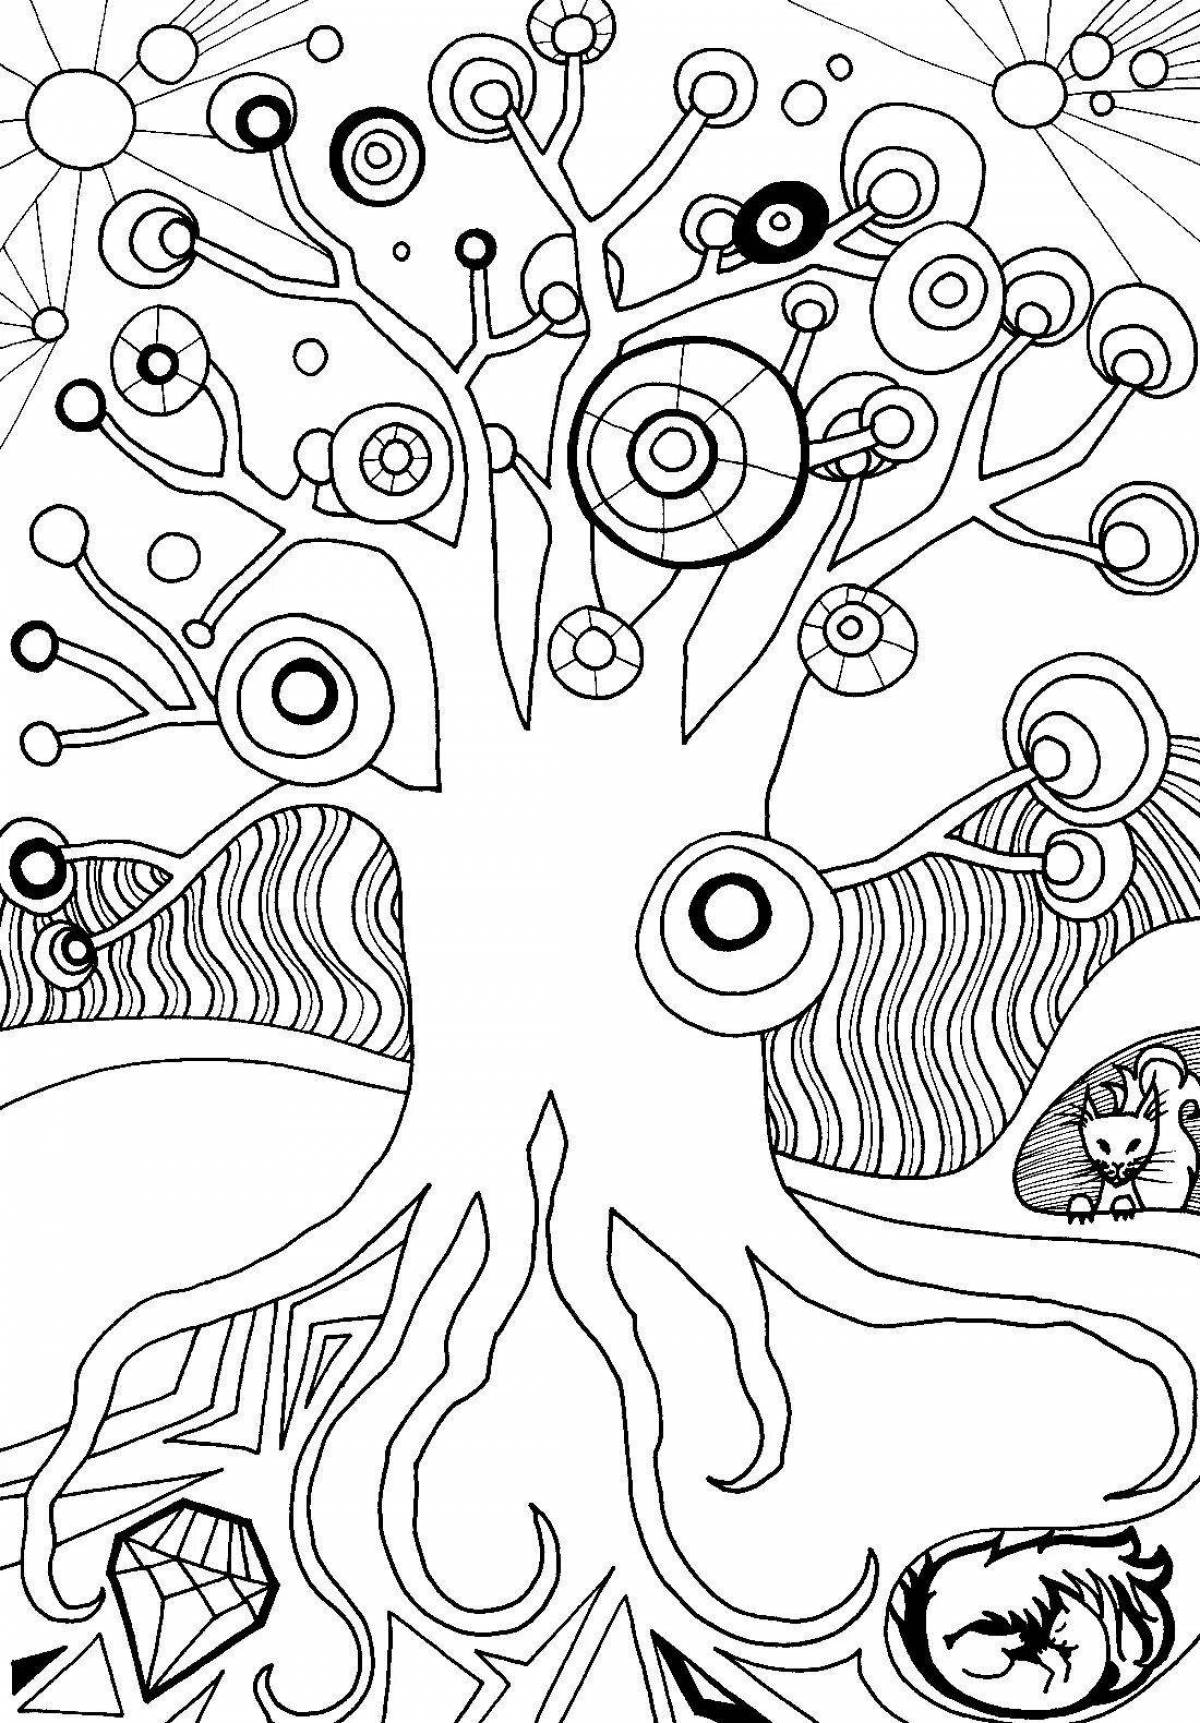 Coloring page wild tree of life